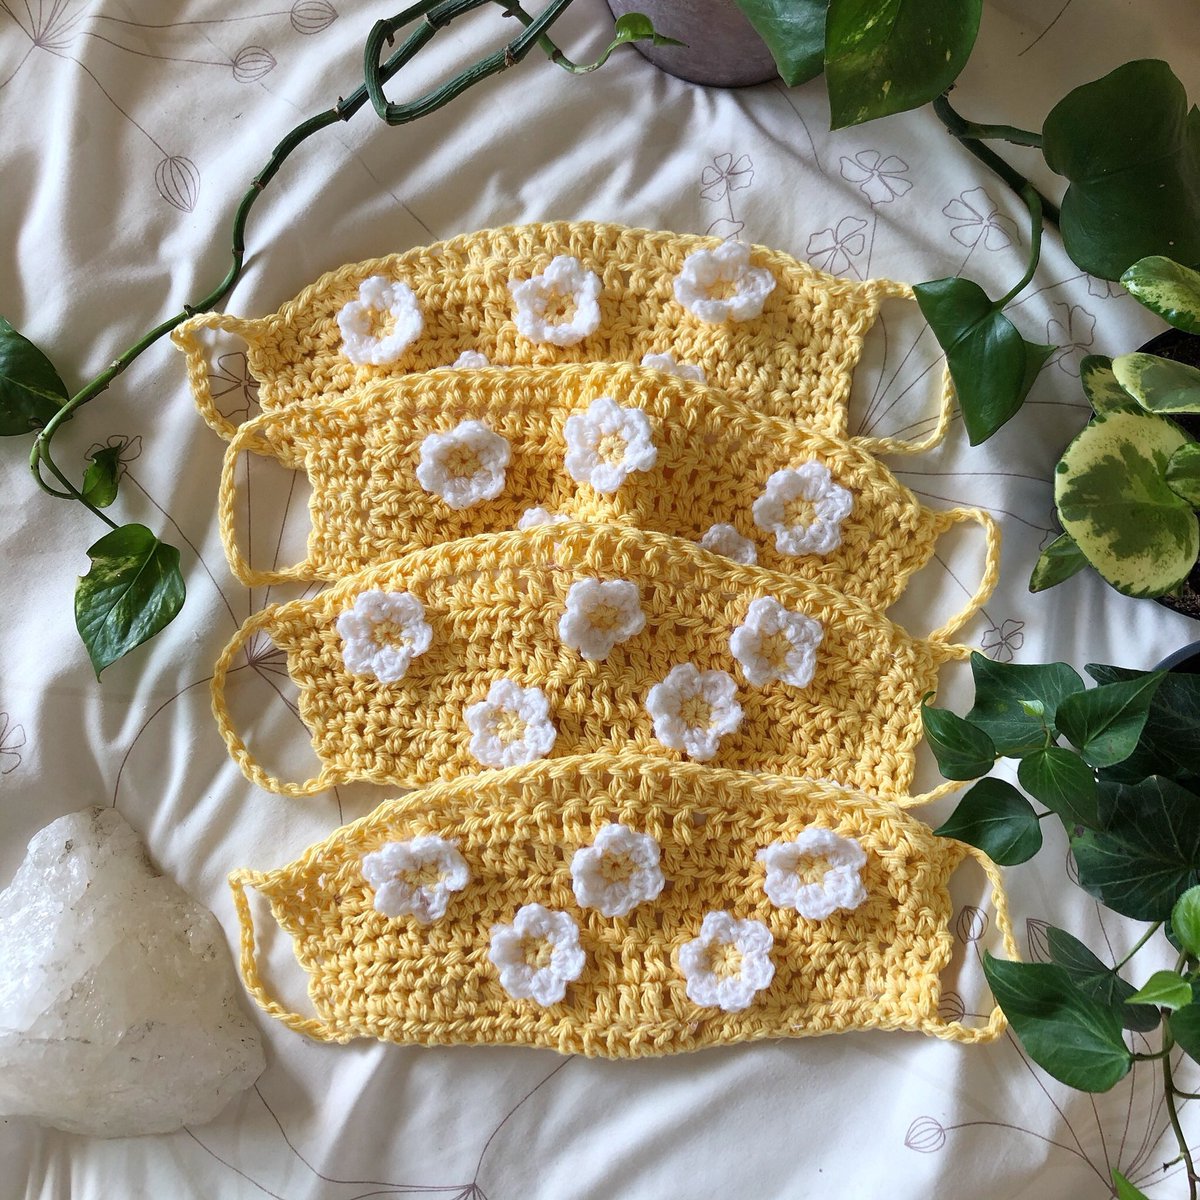 MEET SYDNEY: Hi I’m Sydney and I’m a full time crochet artist! I learned to crochet 6 years ago and have been in love ever since. My website is  http://www.earthlywovencrochet.com  and I do custom orders as well 